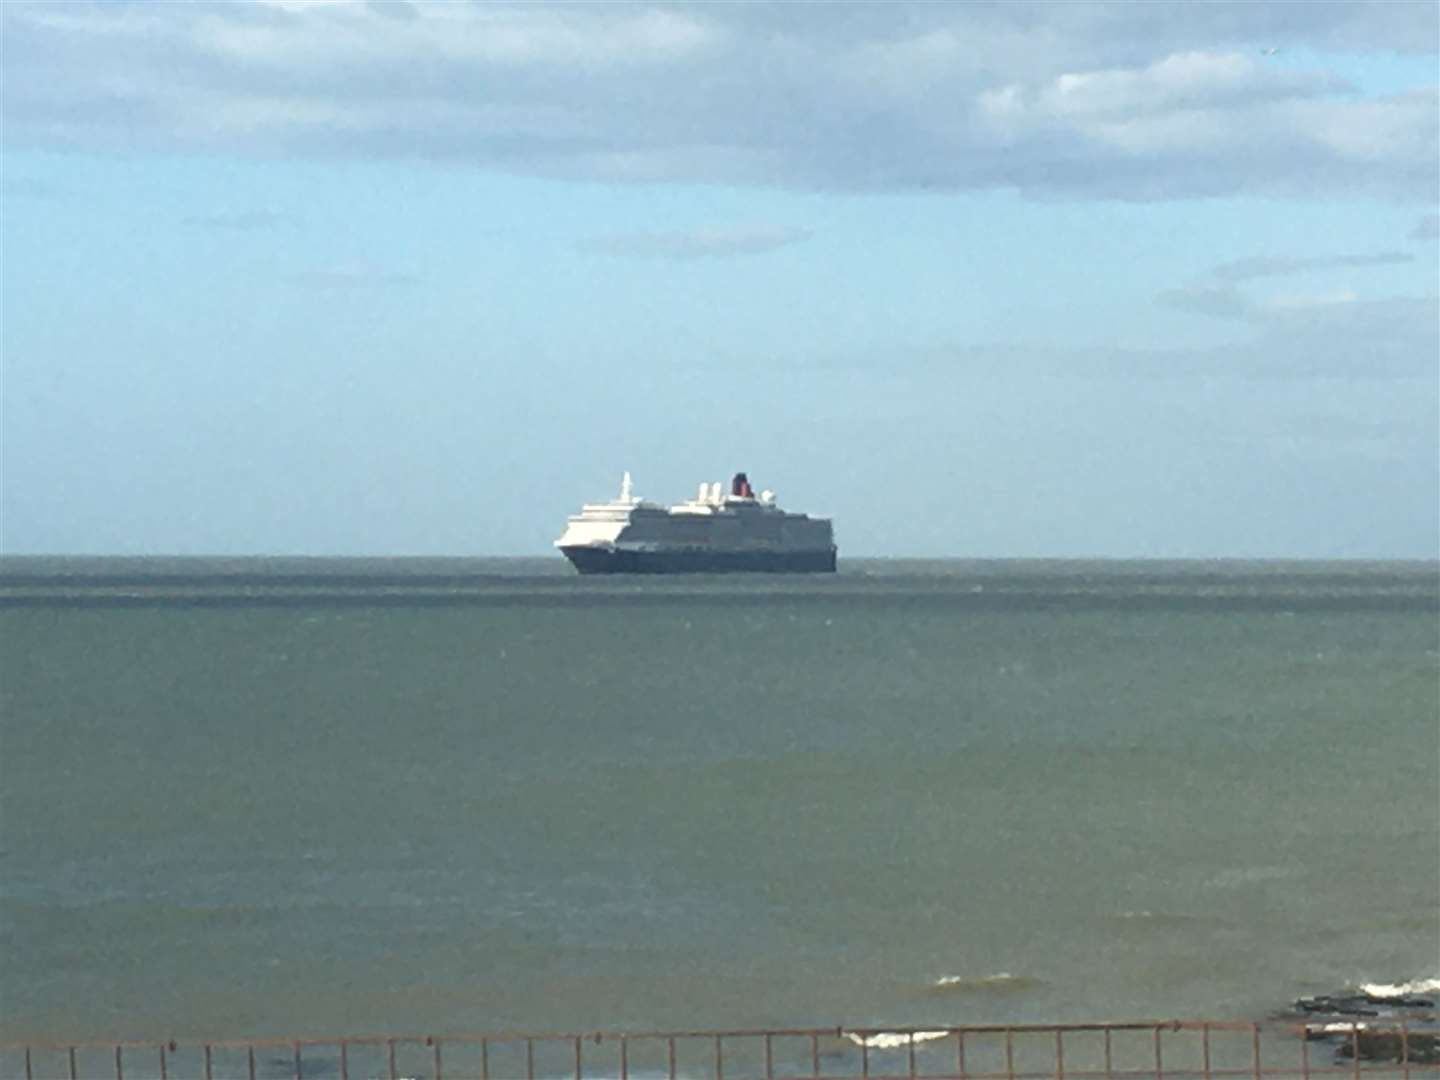 Homeowners could see the ship off Kent from their homes